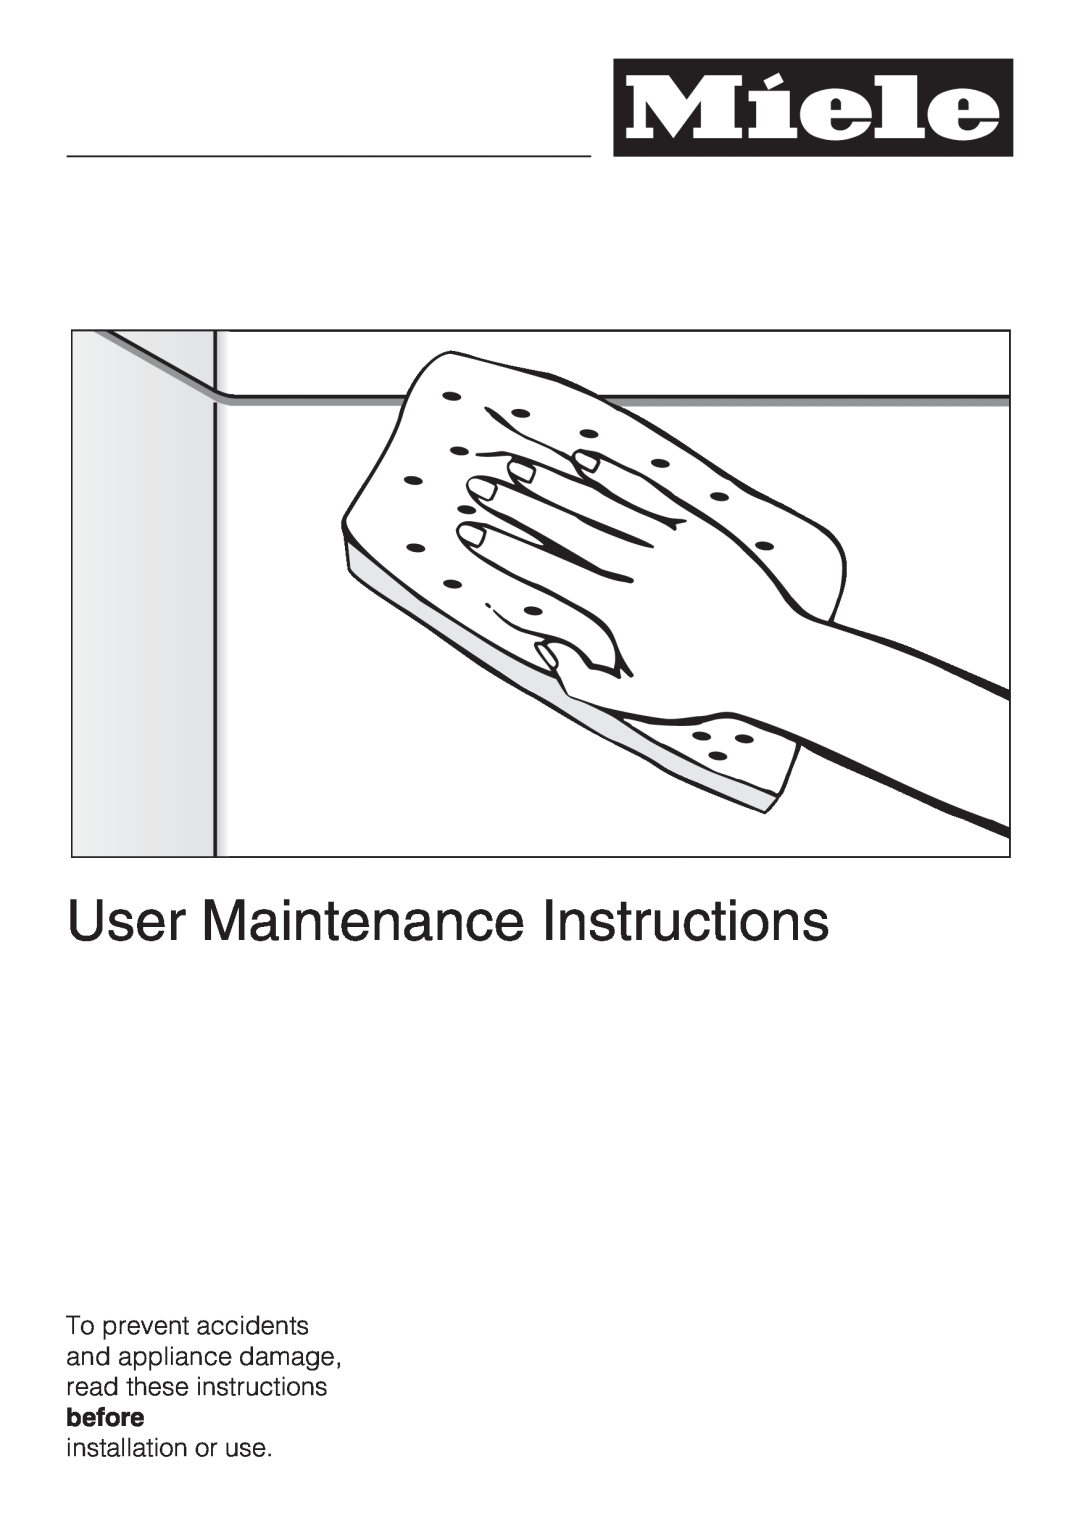 Miele G 5910, G 5915 operating instructions User Maintenance Instructions, installation or use 